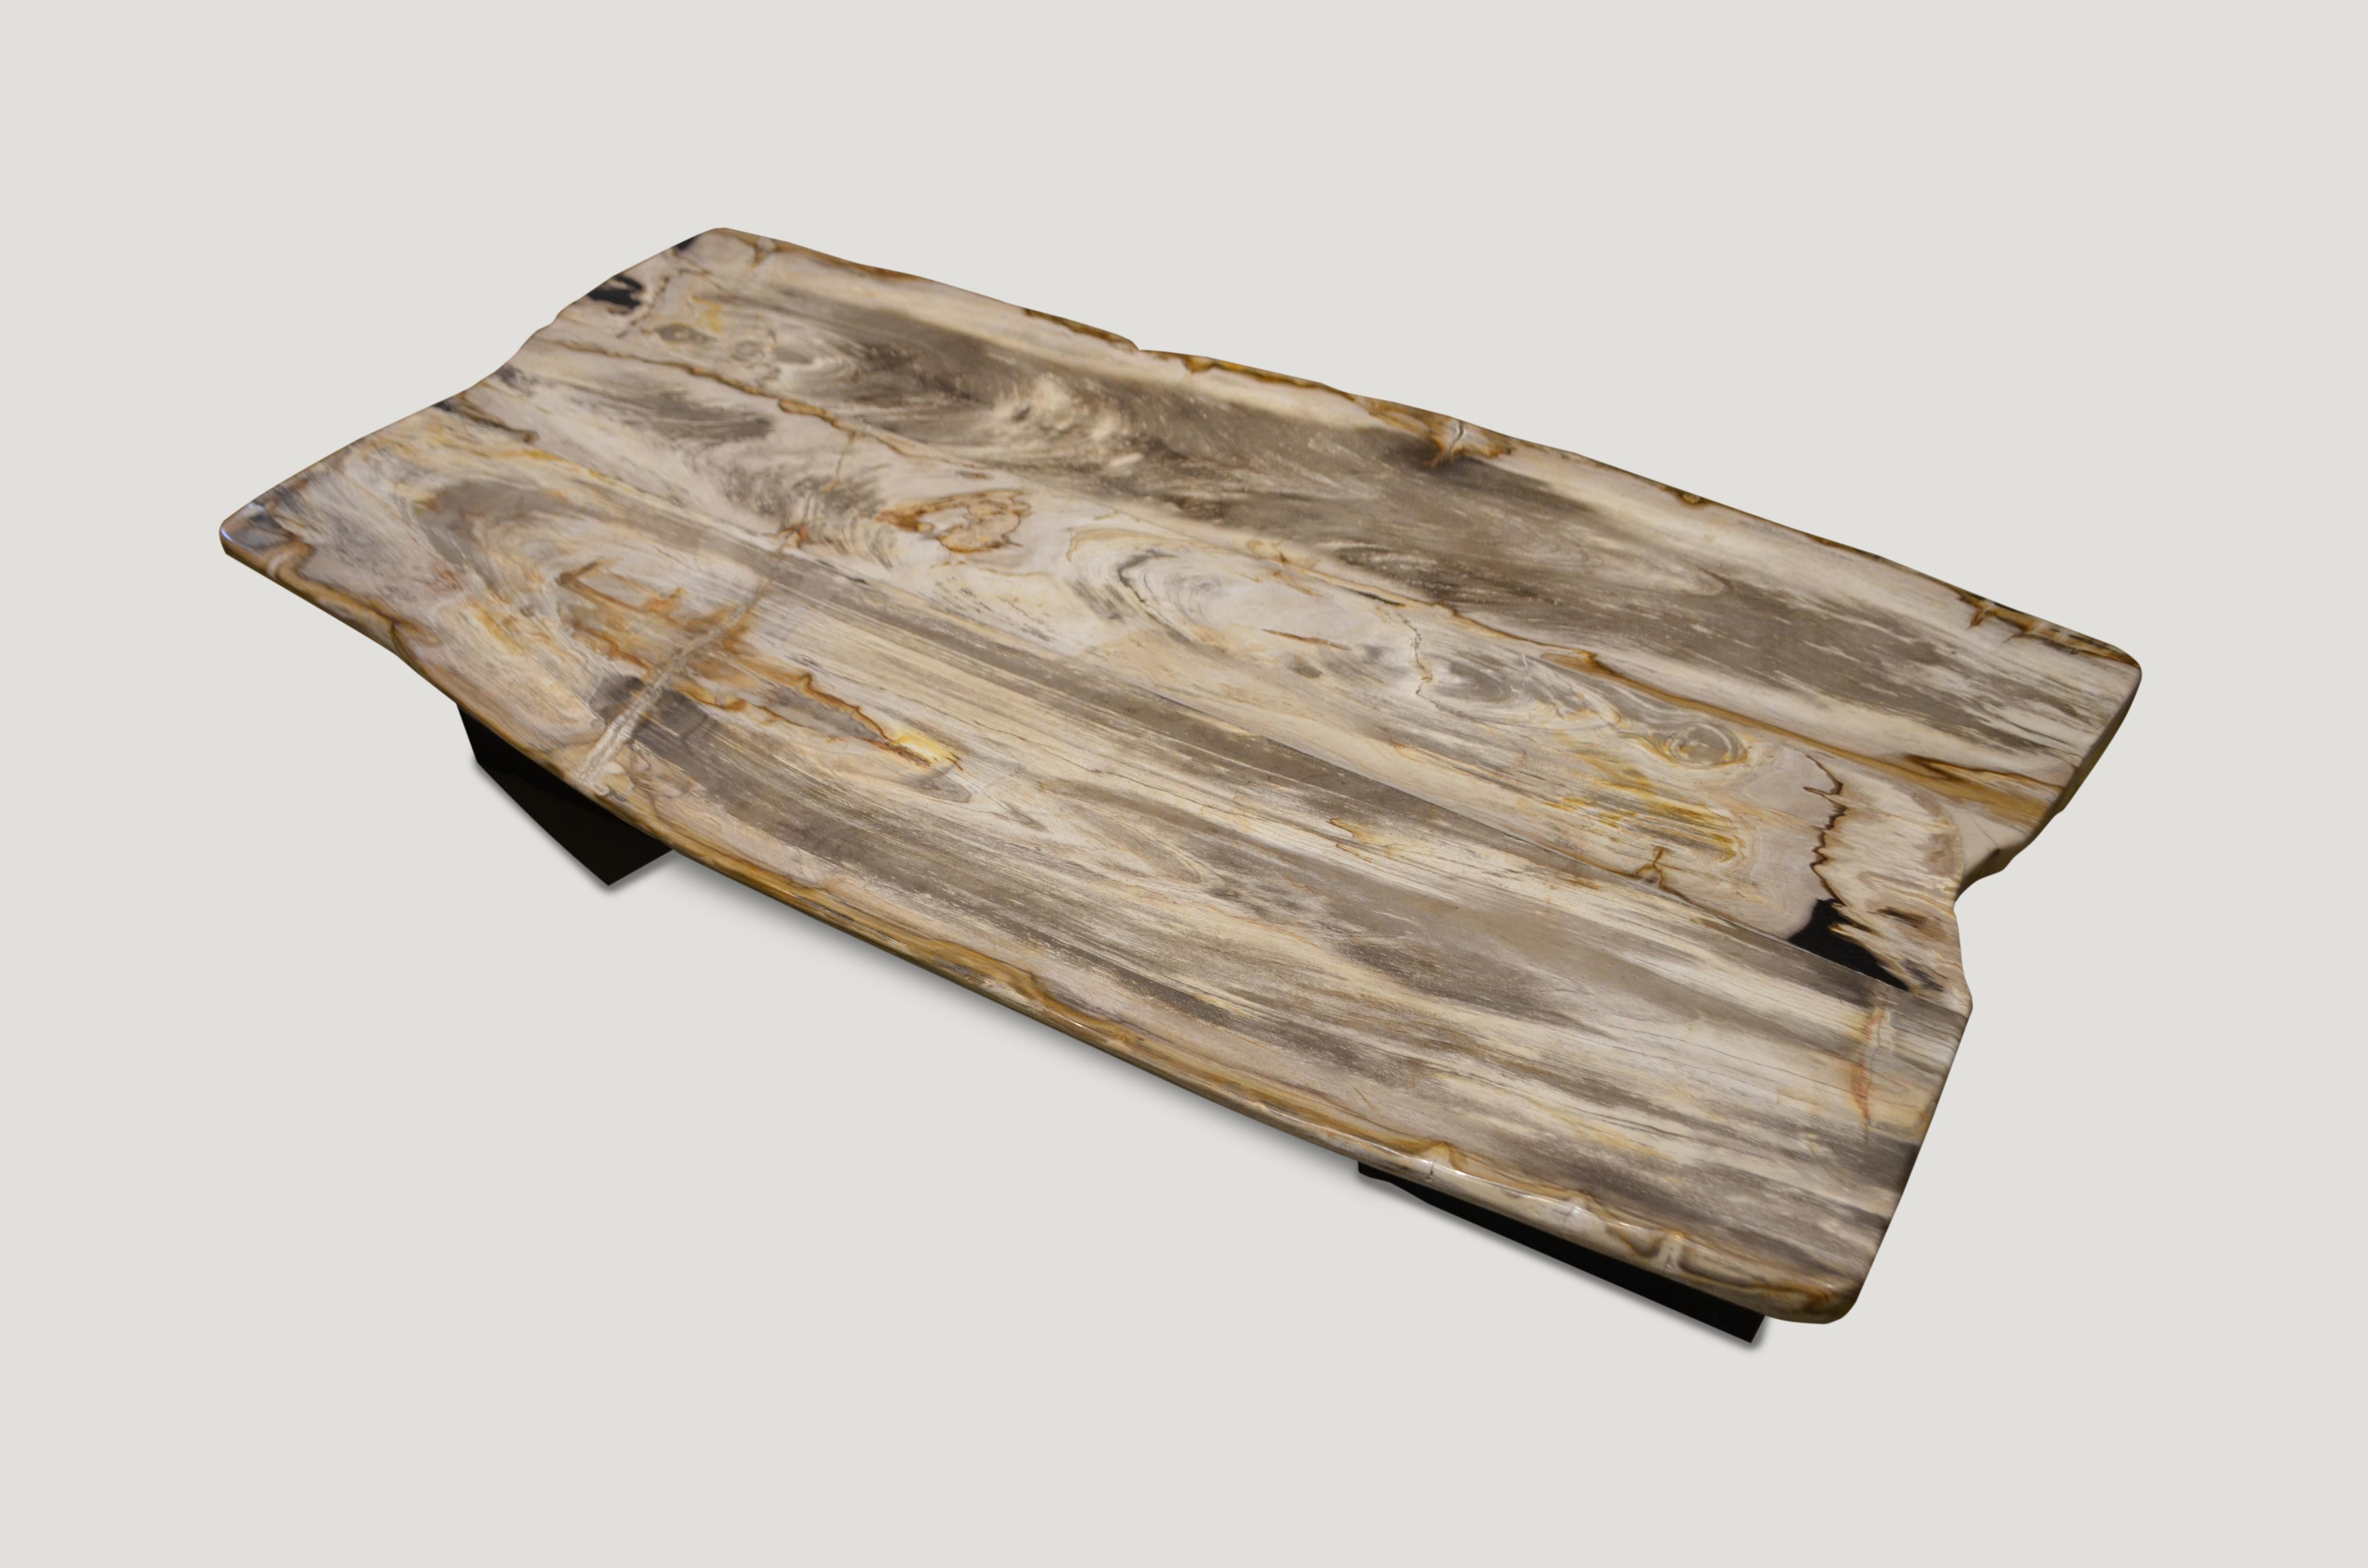 High quality super smooth petrified wood coffee table, dining table or counter top. Stunning creamy beige with contrasting black, charcoal grey and natural tones make this an impressive piece for any space. This two inch thick slab is shown floating